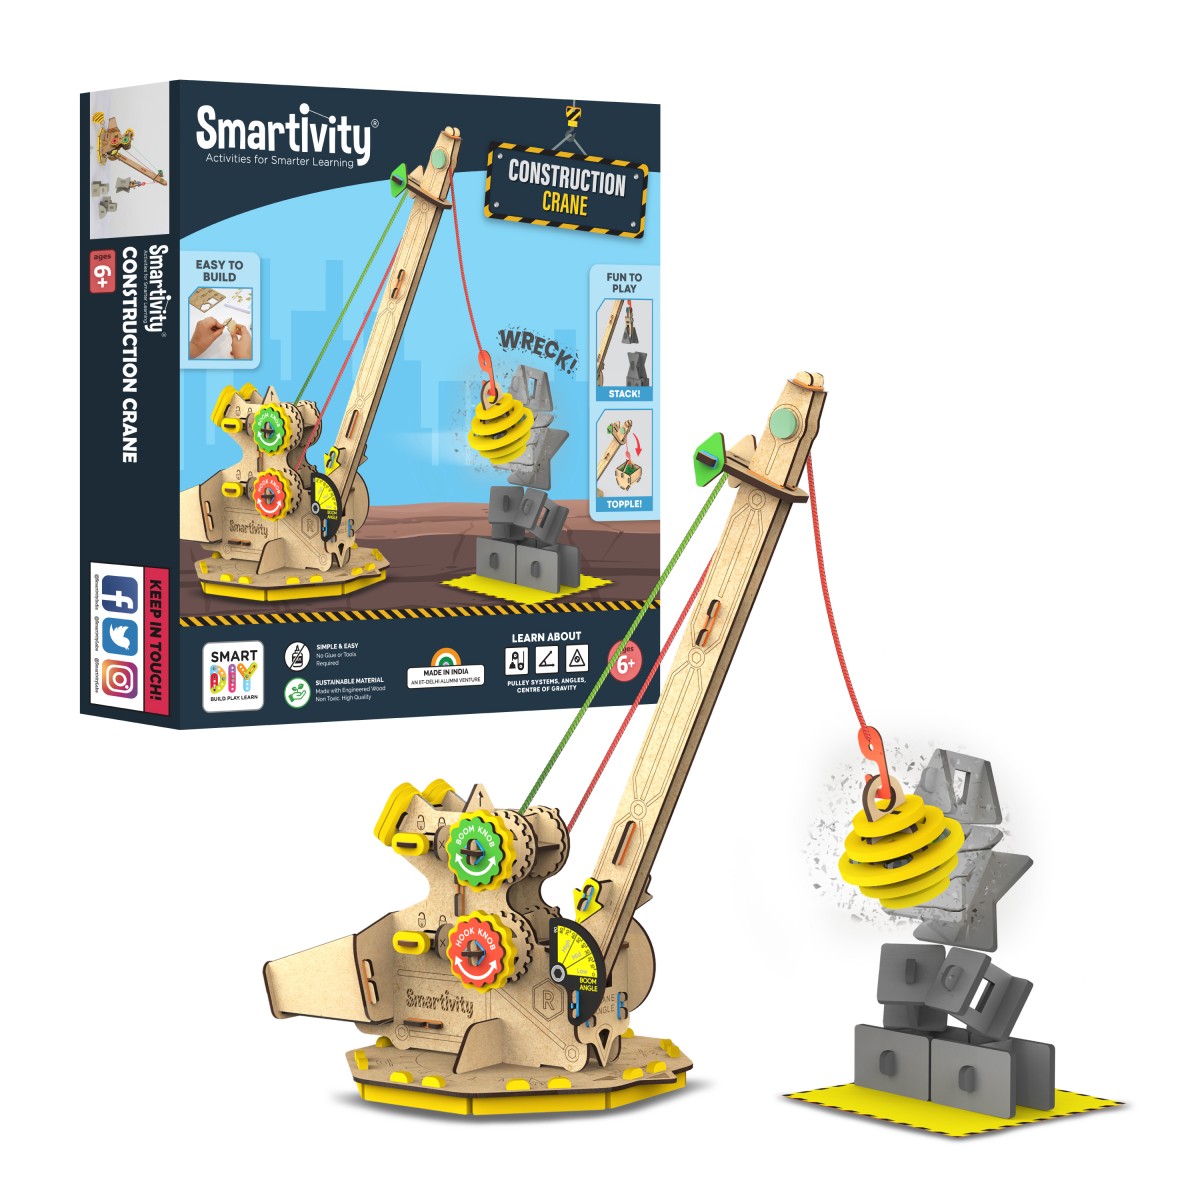 Smartivity Construction Crane with 3 Pulley, STEM DIY Fun Toy, Educational and Construction Based Activity Game Kit for Kids 6 to 14, Best Gift for Boys and Girls, Learn Science Engineering Project, Made in India by IIT Delhi Alumni